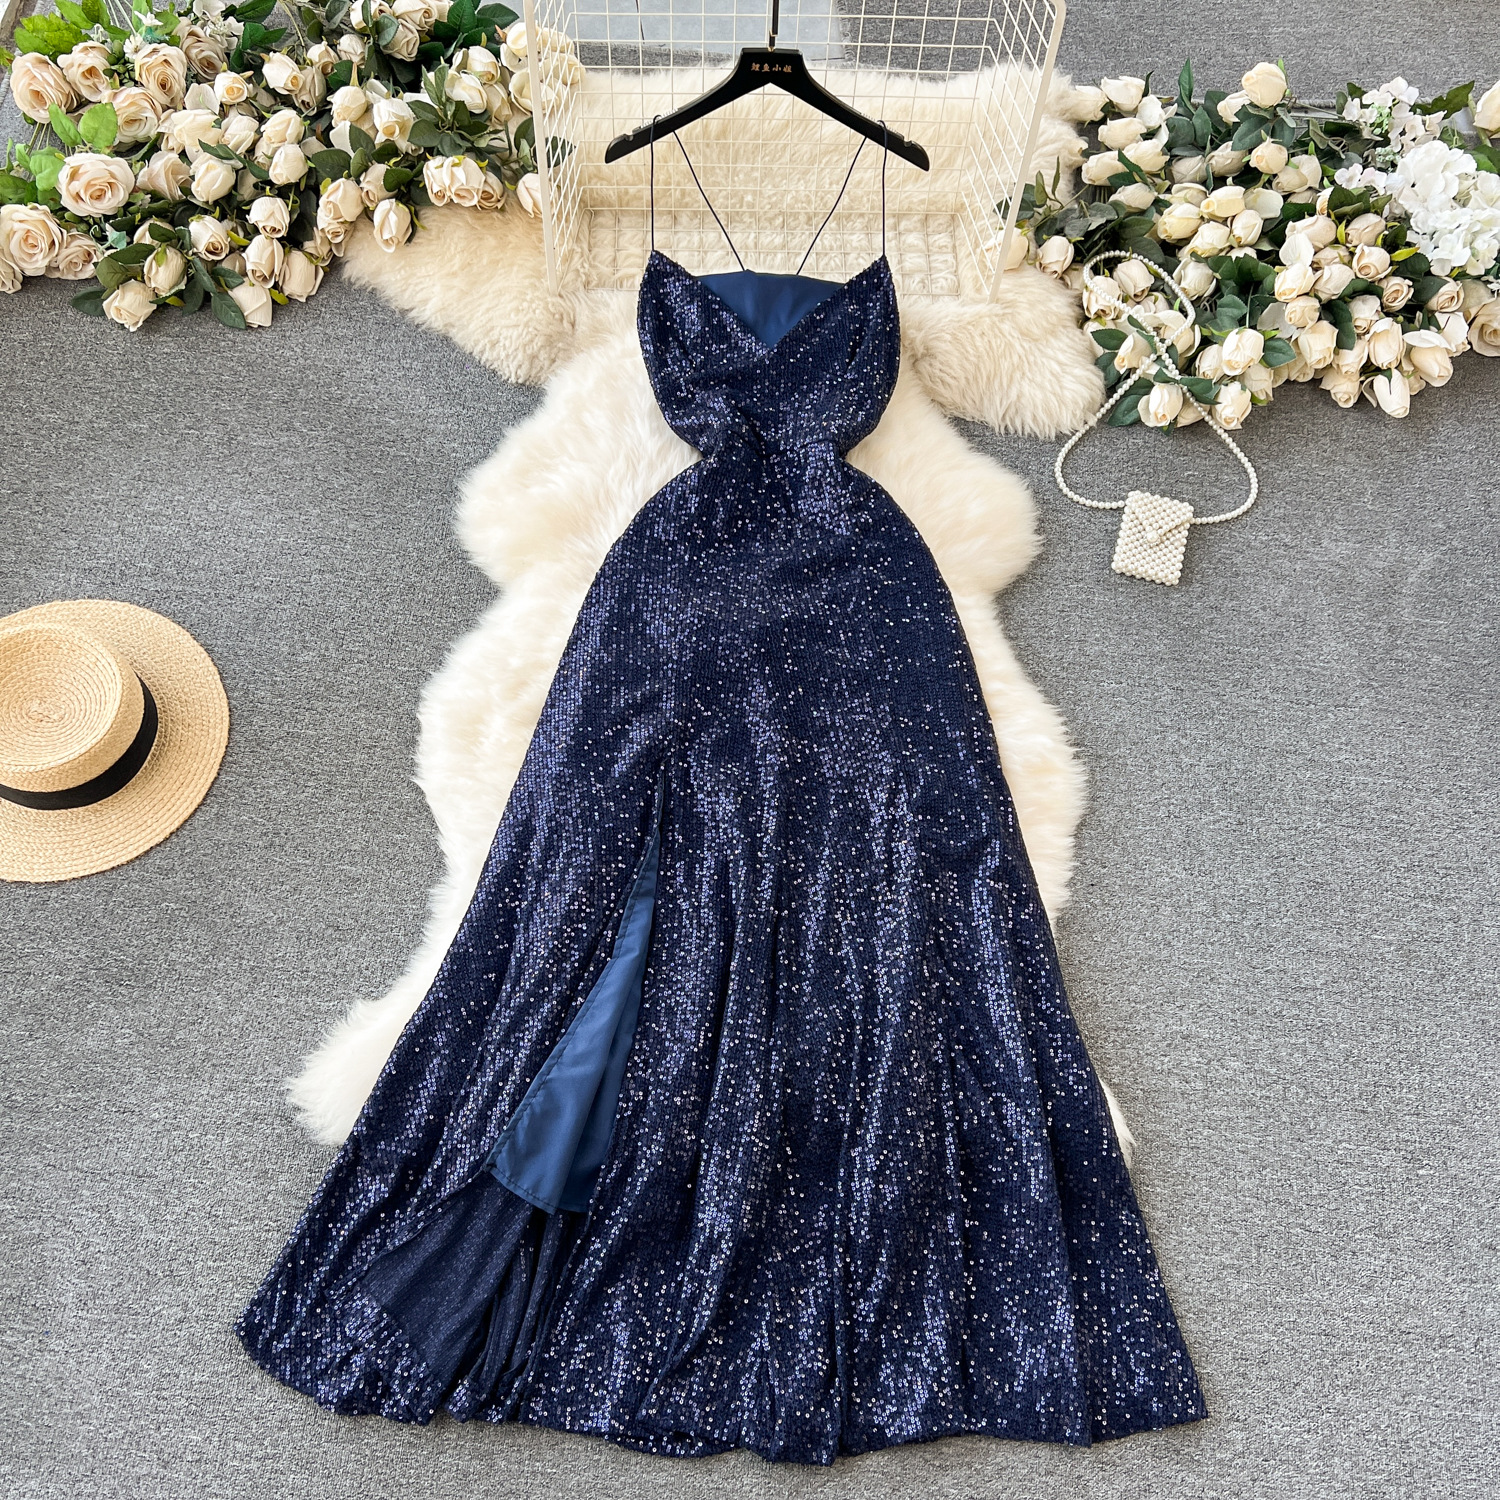 High end socialite style banquet dress sexy backless strap slim fit long light luxury sequin dress with suspender skirt